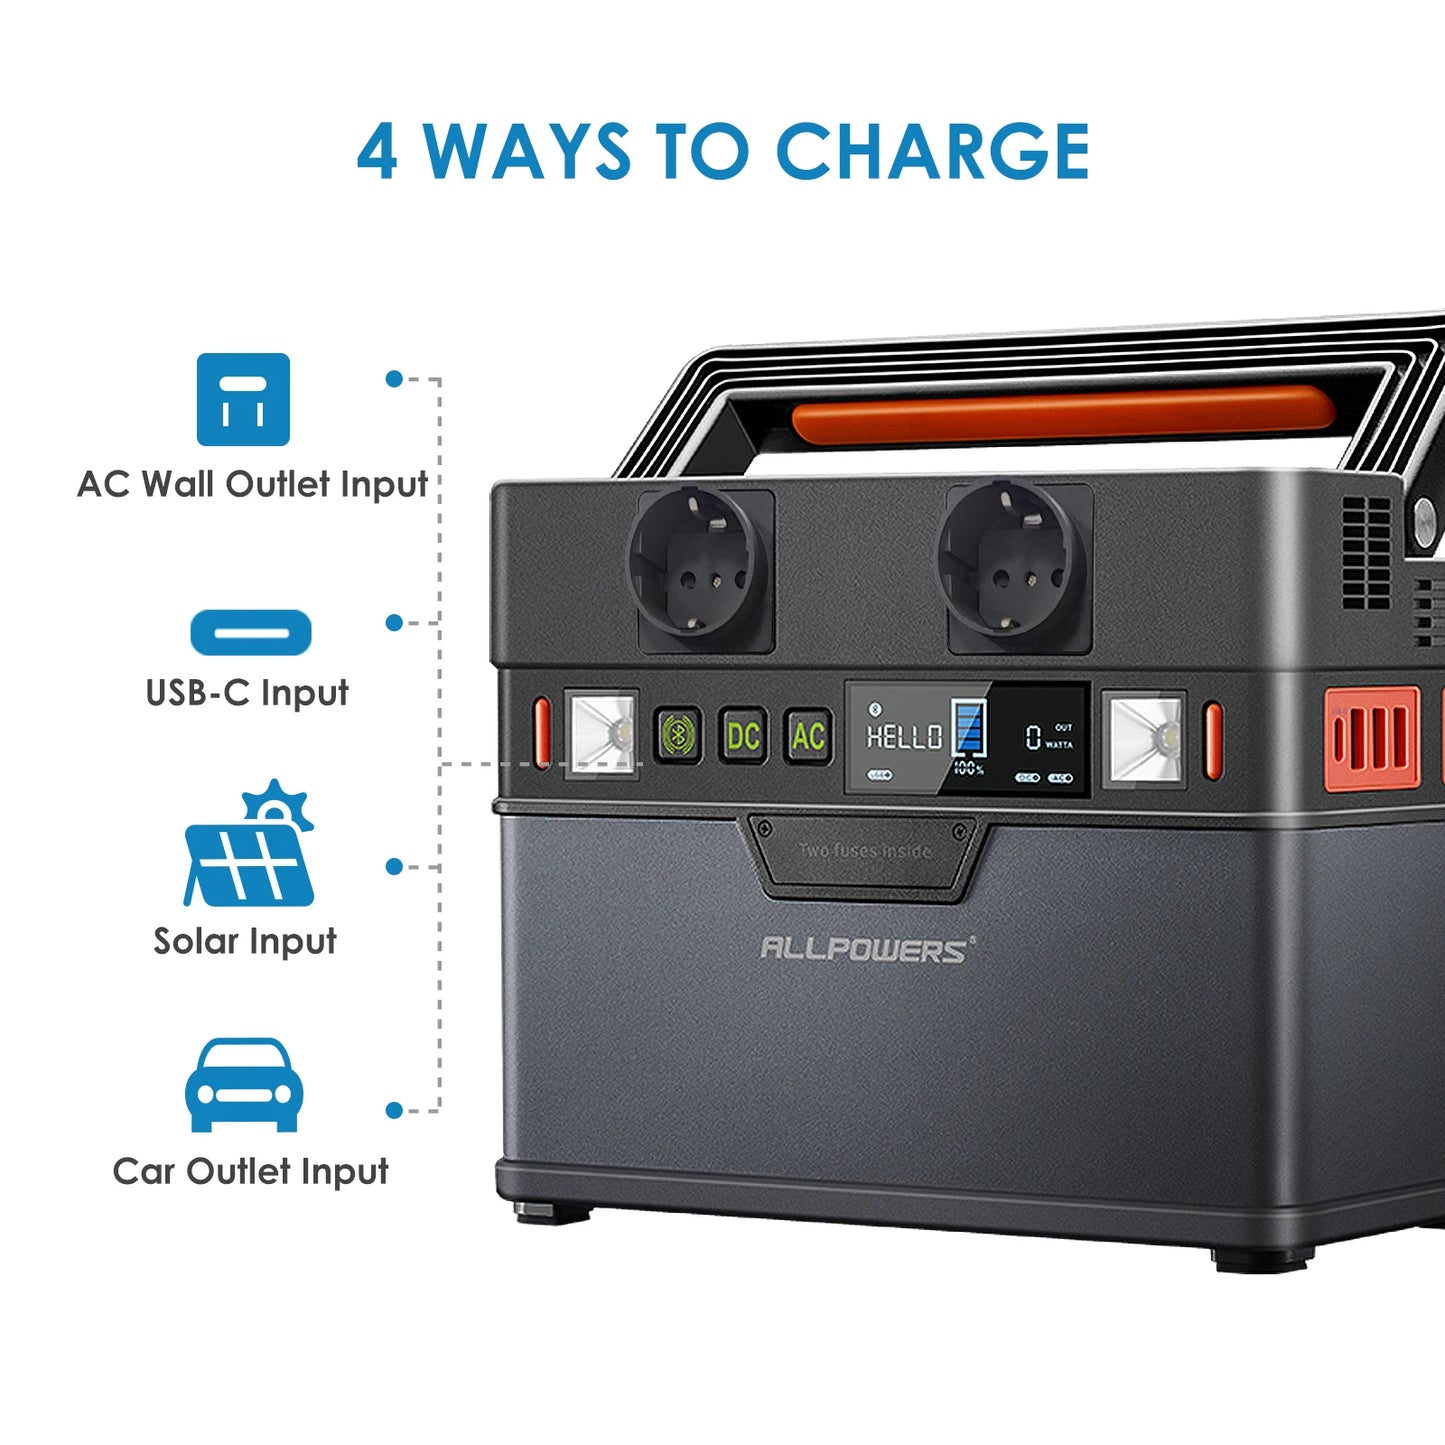 ALLPOWERS Portable Power Station 288Wh / 78000mAh